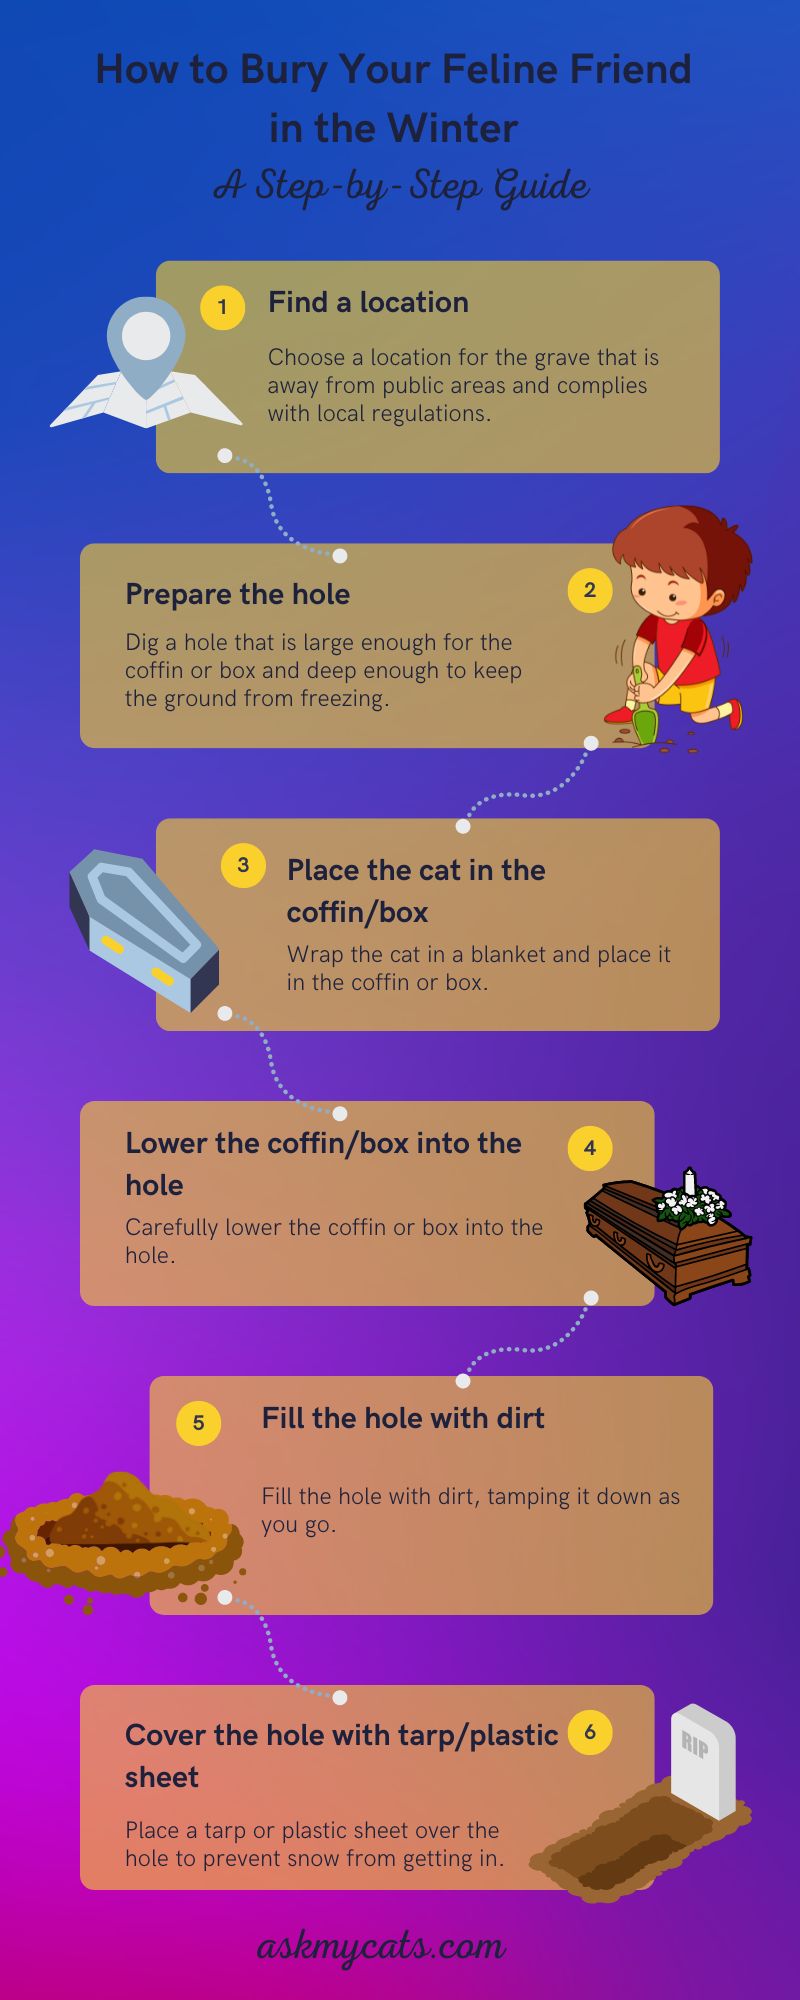 How to Bury Your Feline Friend in the Winter (Infographic)